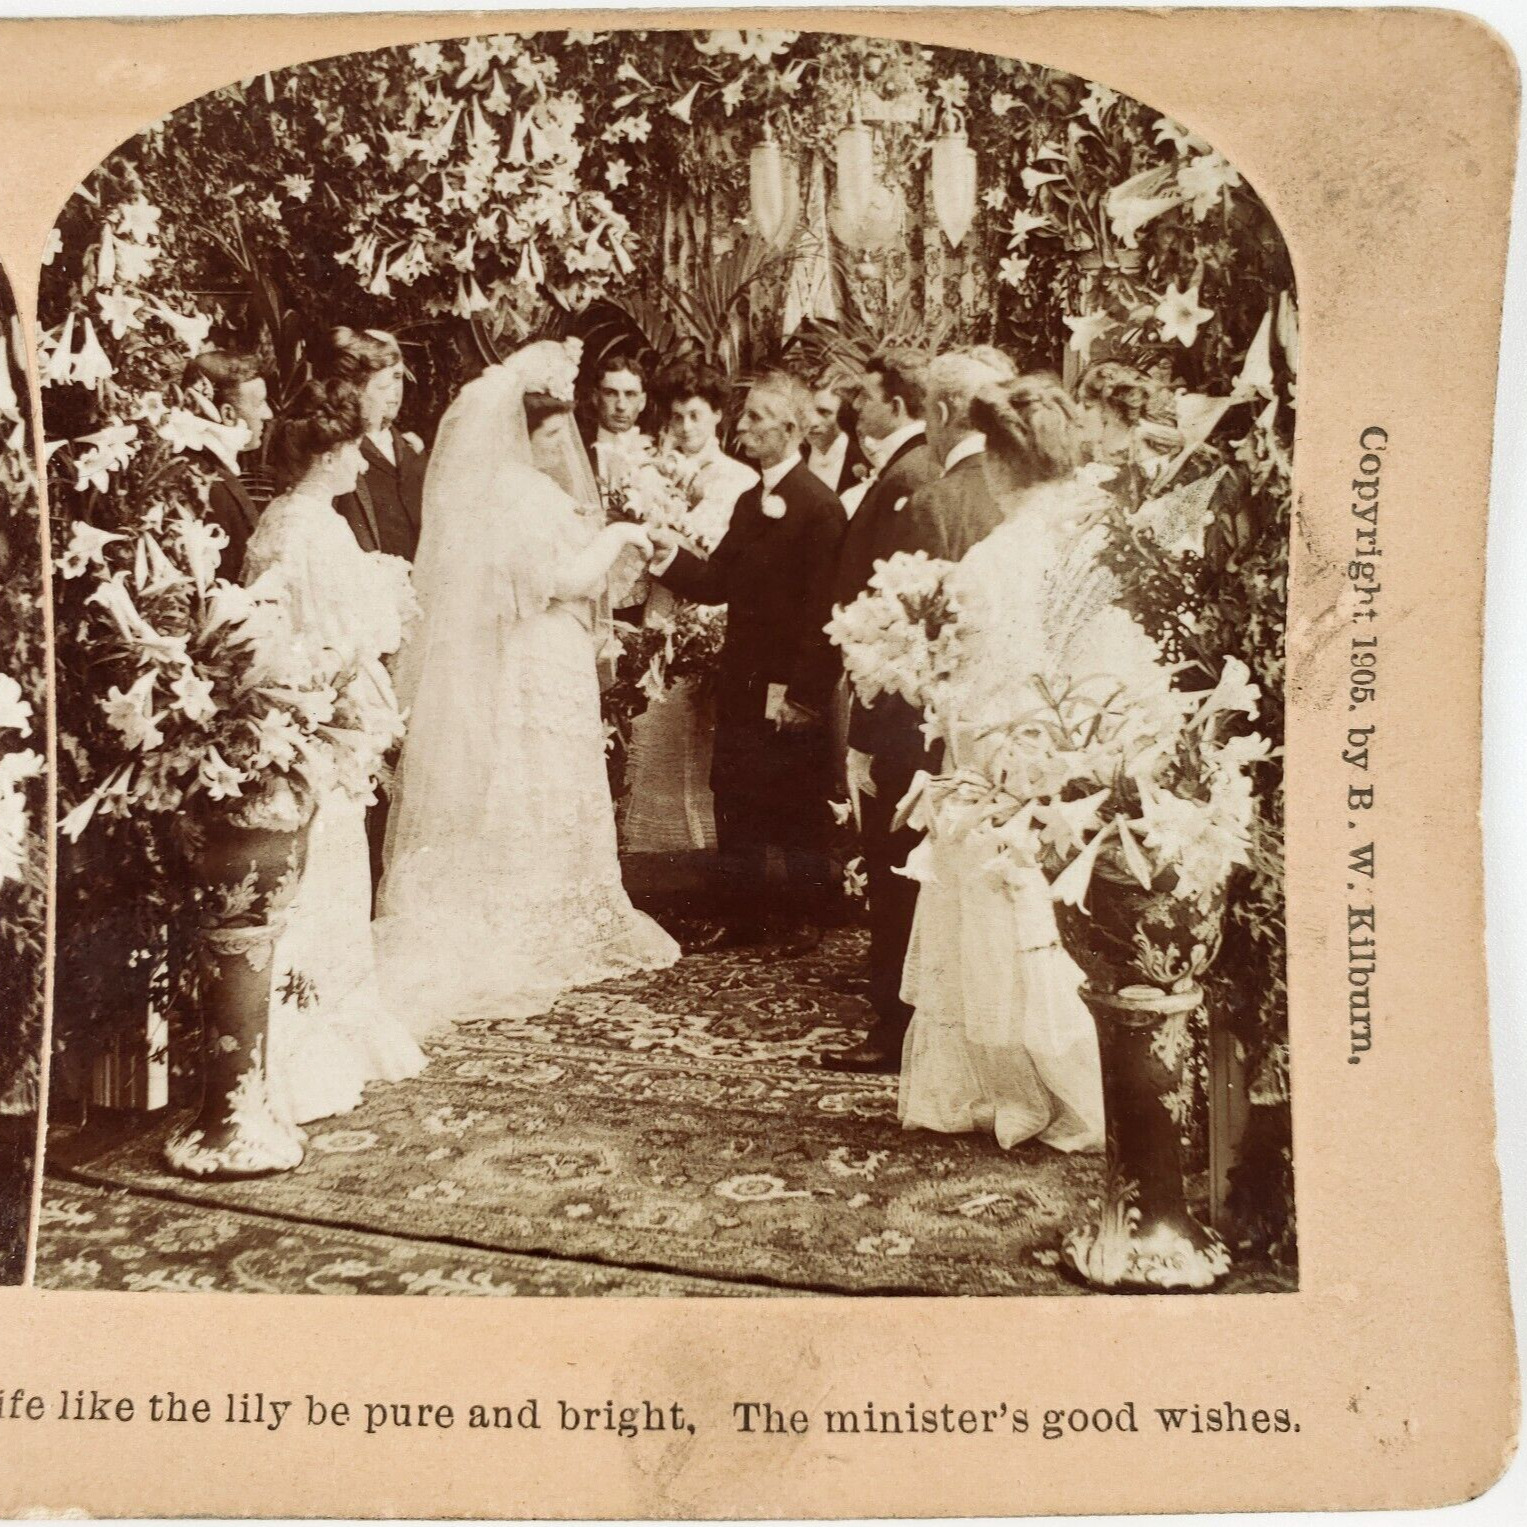 Minister Blessing Wedding Bride Stereoview c1905 Marriage Ceremony Party E815